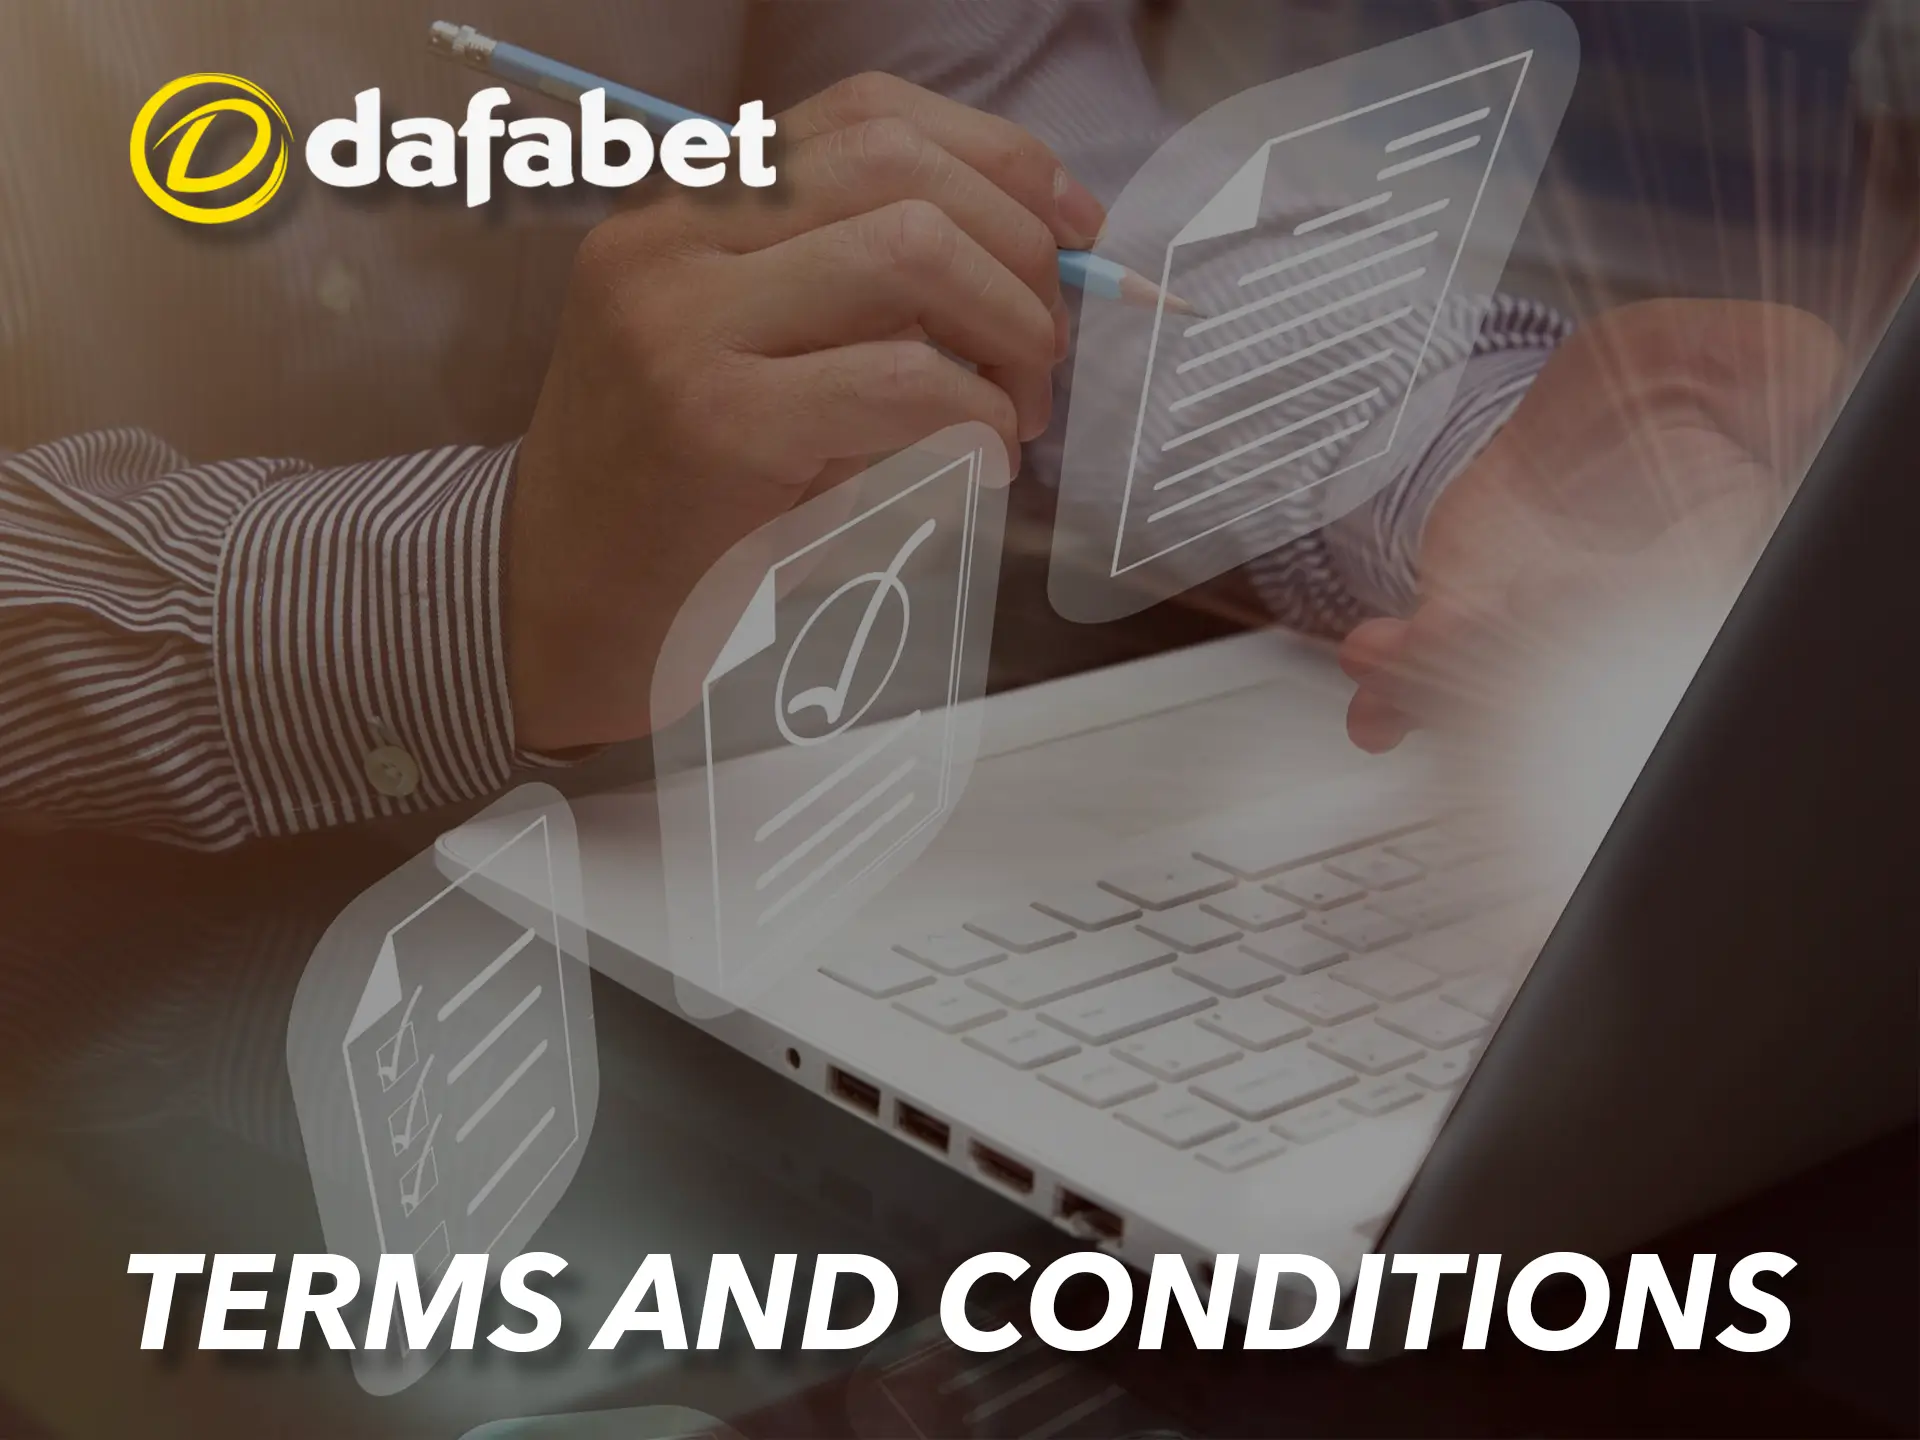 Familiarise yourself with the bonus rules on the Dafabet site.